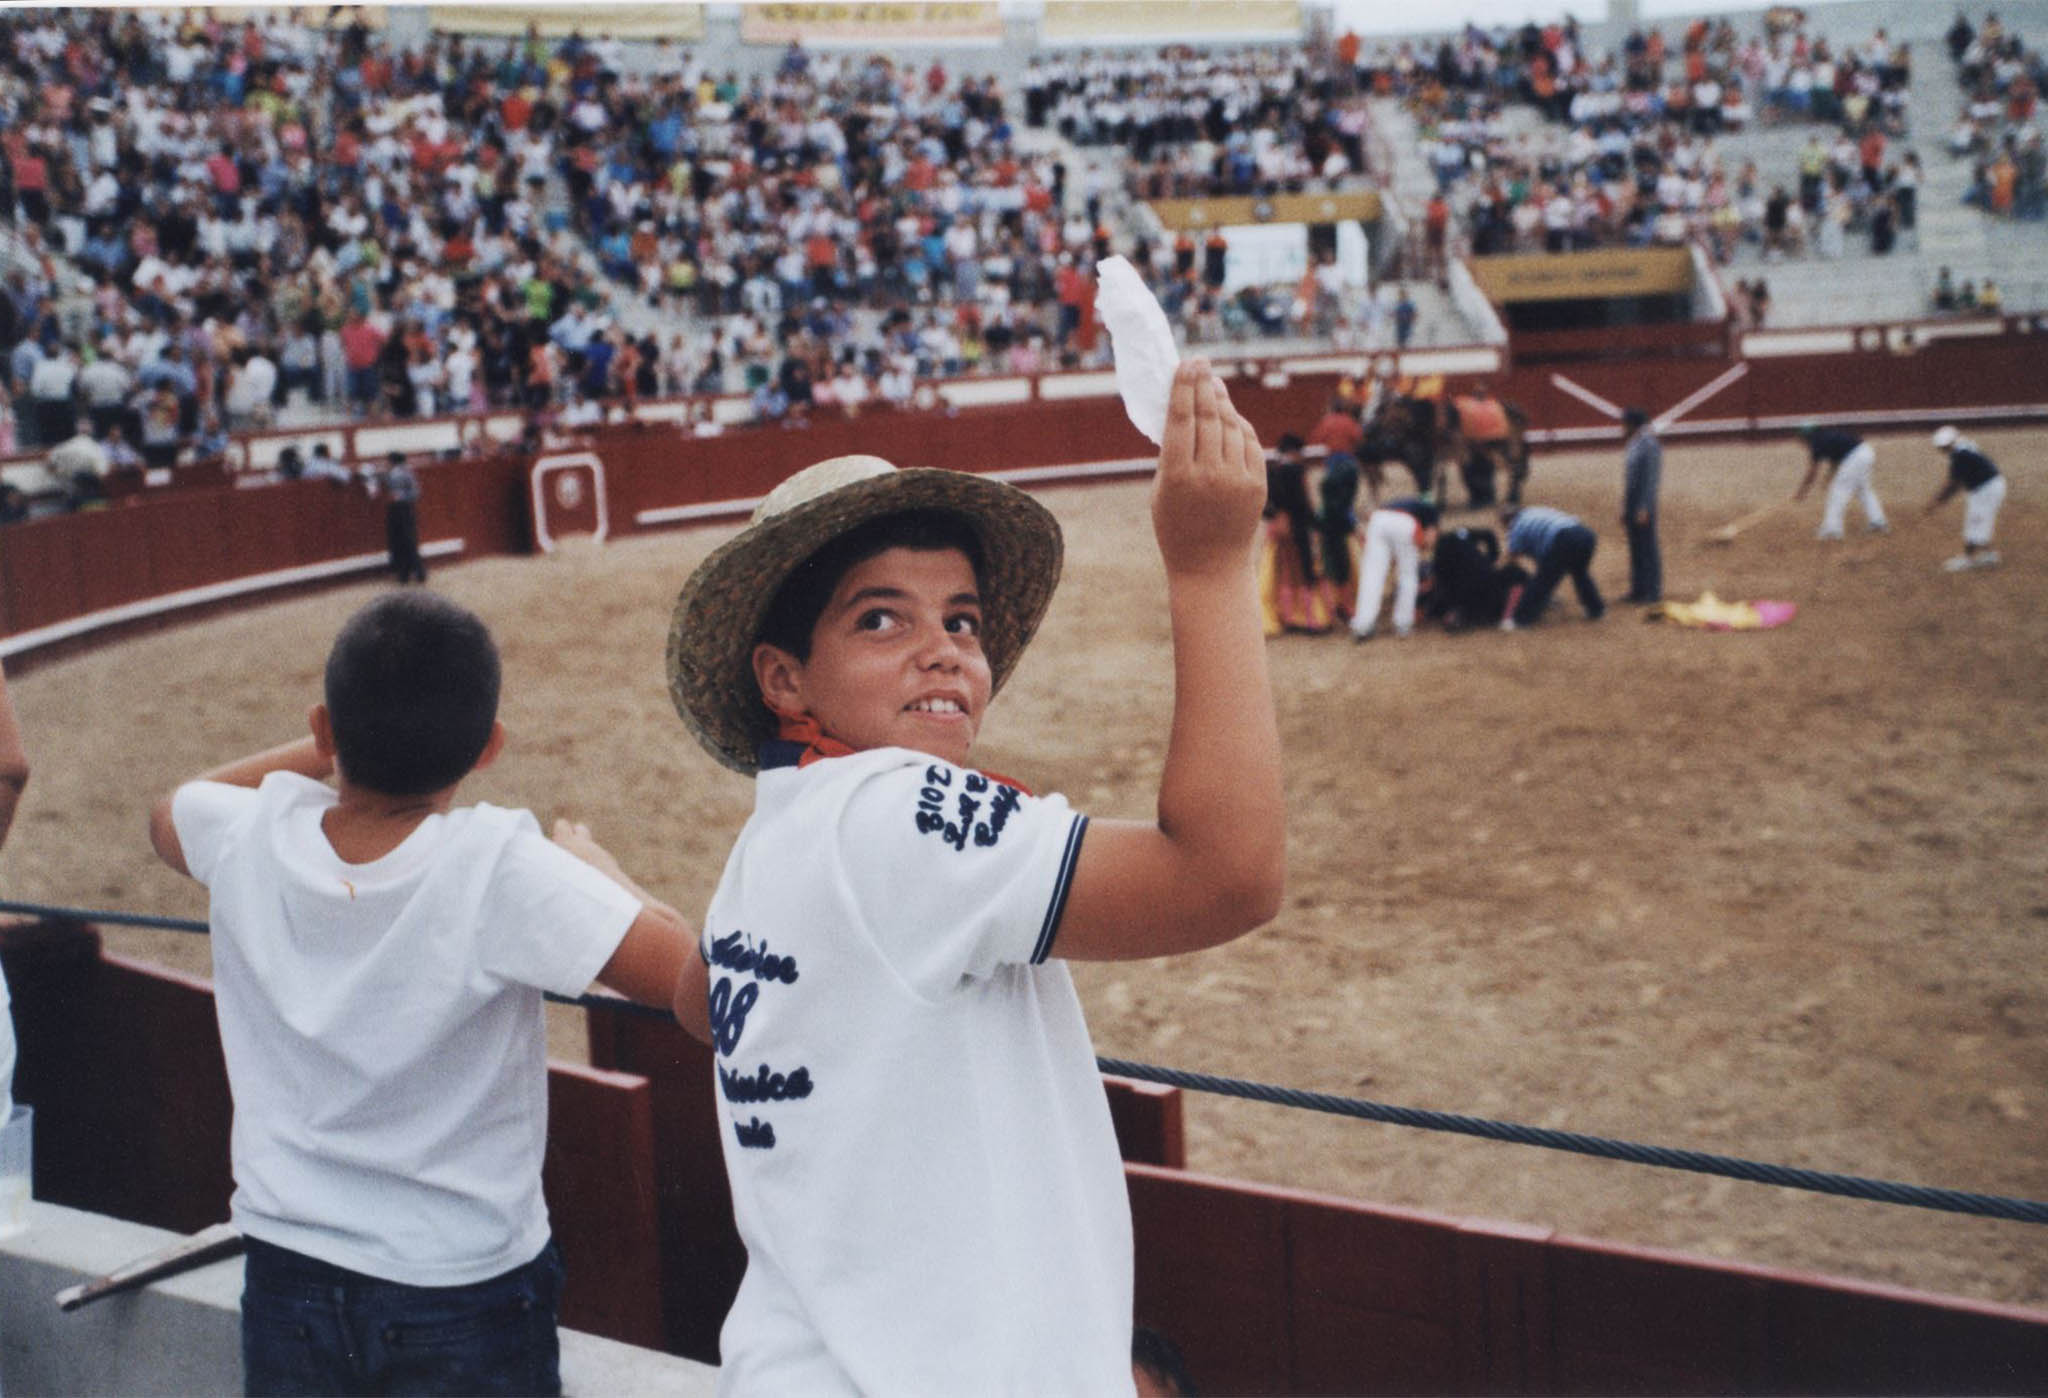 About twelve years old, this young man waves white to show the judges what he thinks of the fight-the bullfighter should have an ear. The colour shift is Portra's alone, this is an unedited scan from a postcard-sized print.